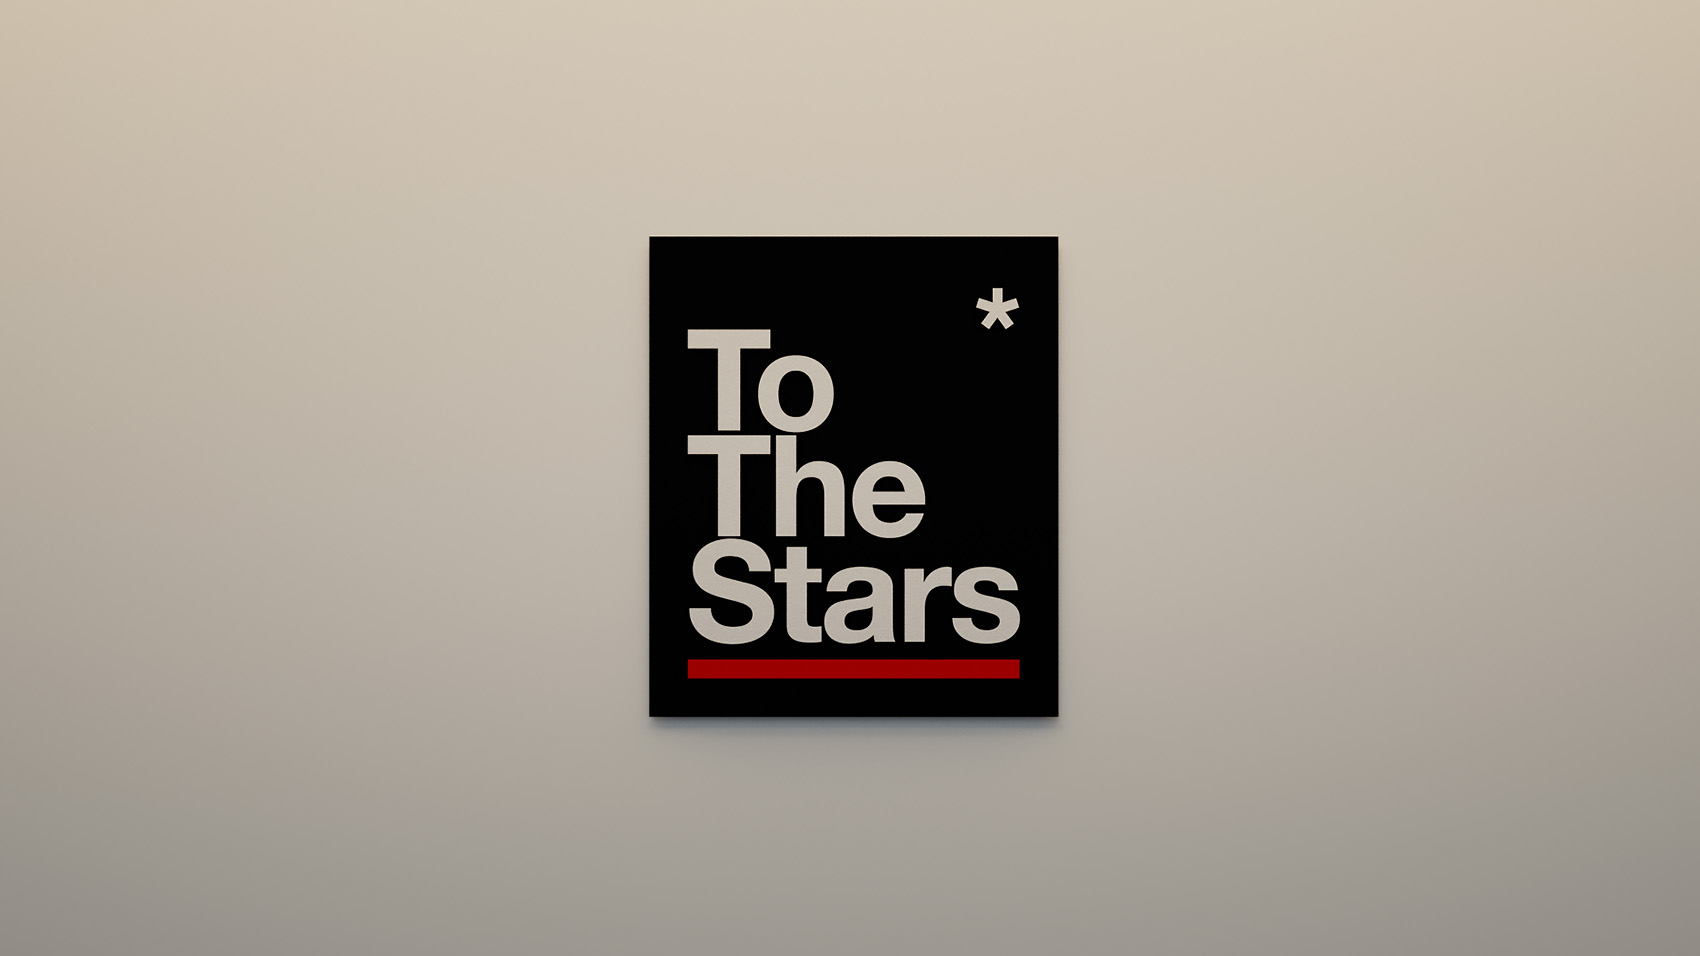 To The Stars